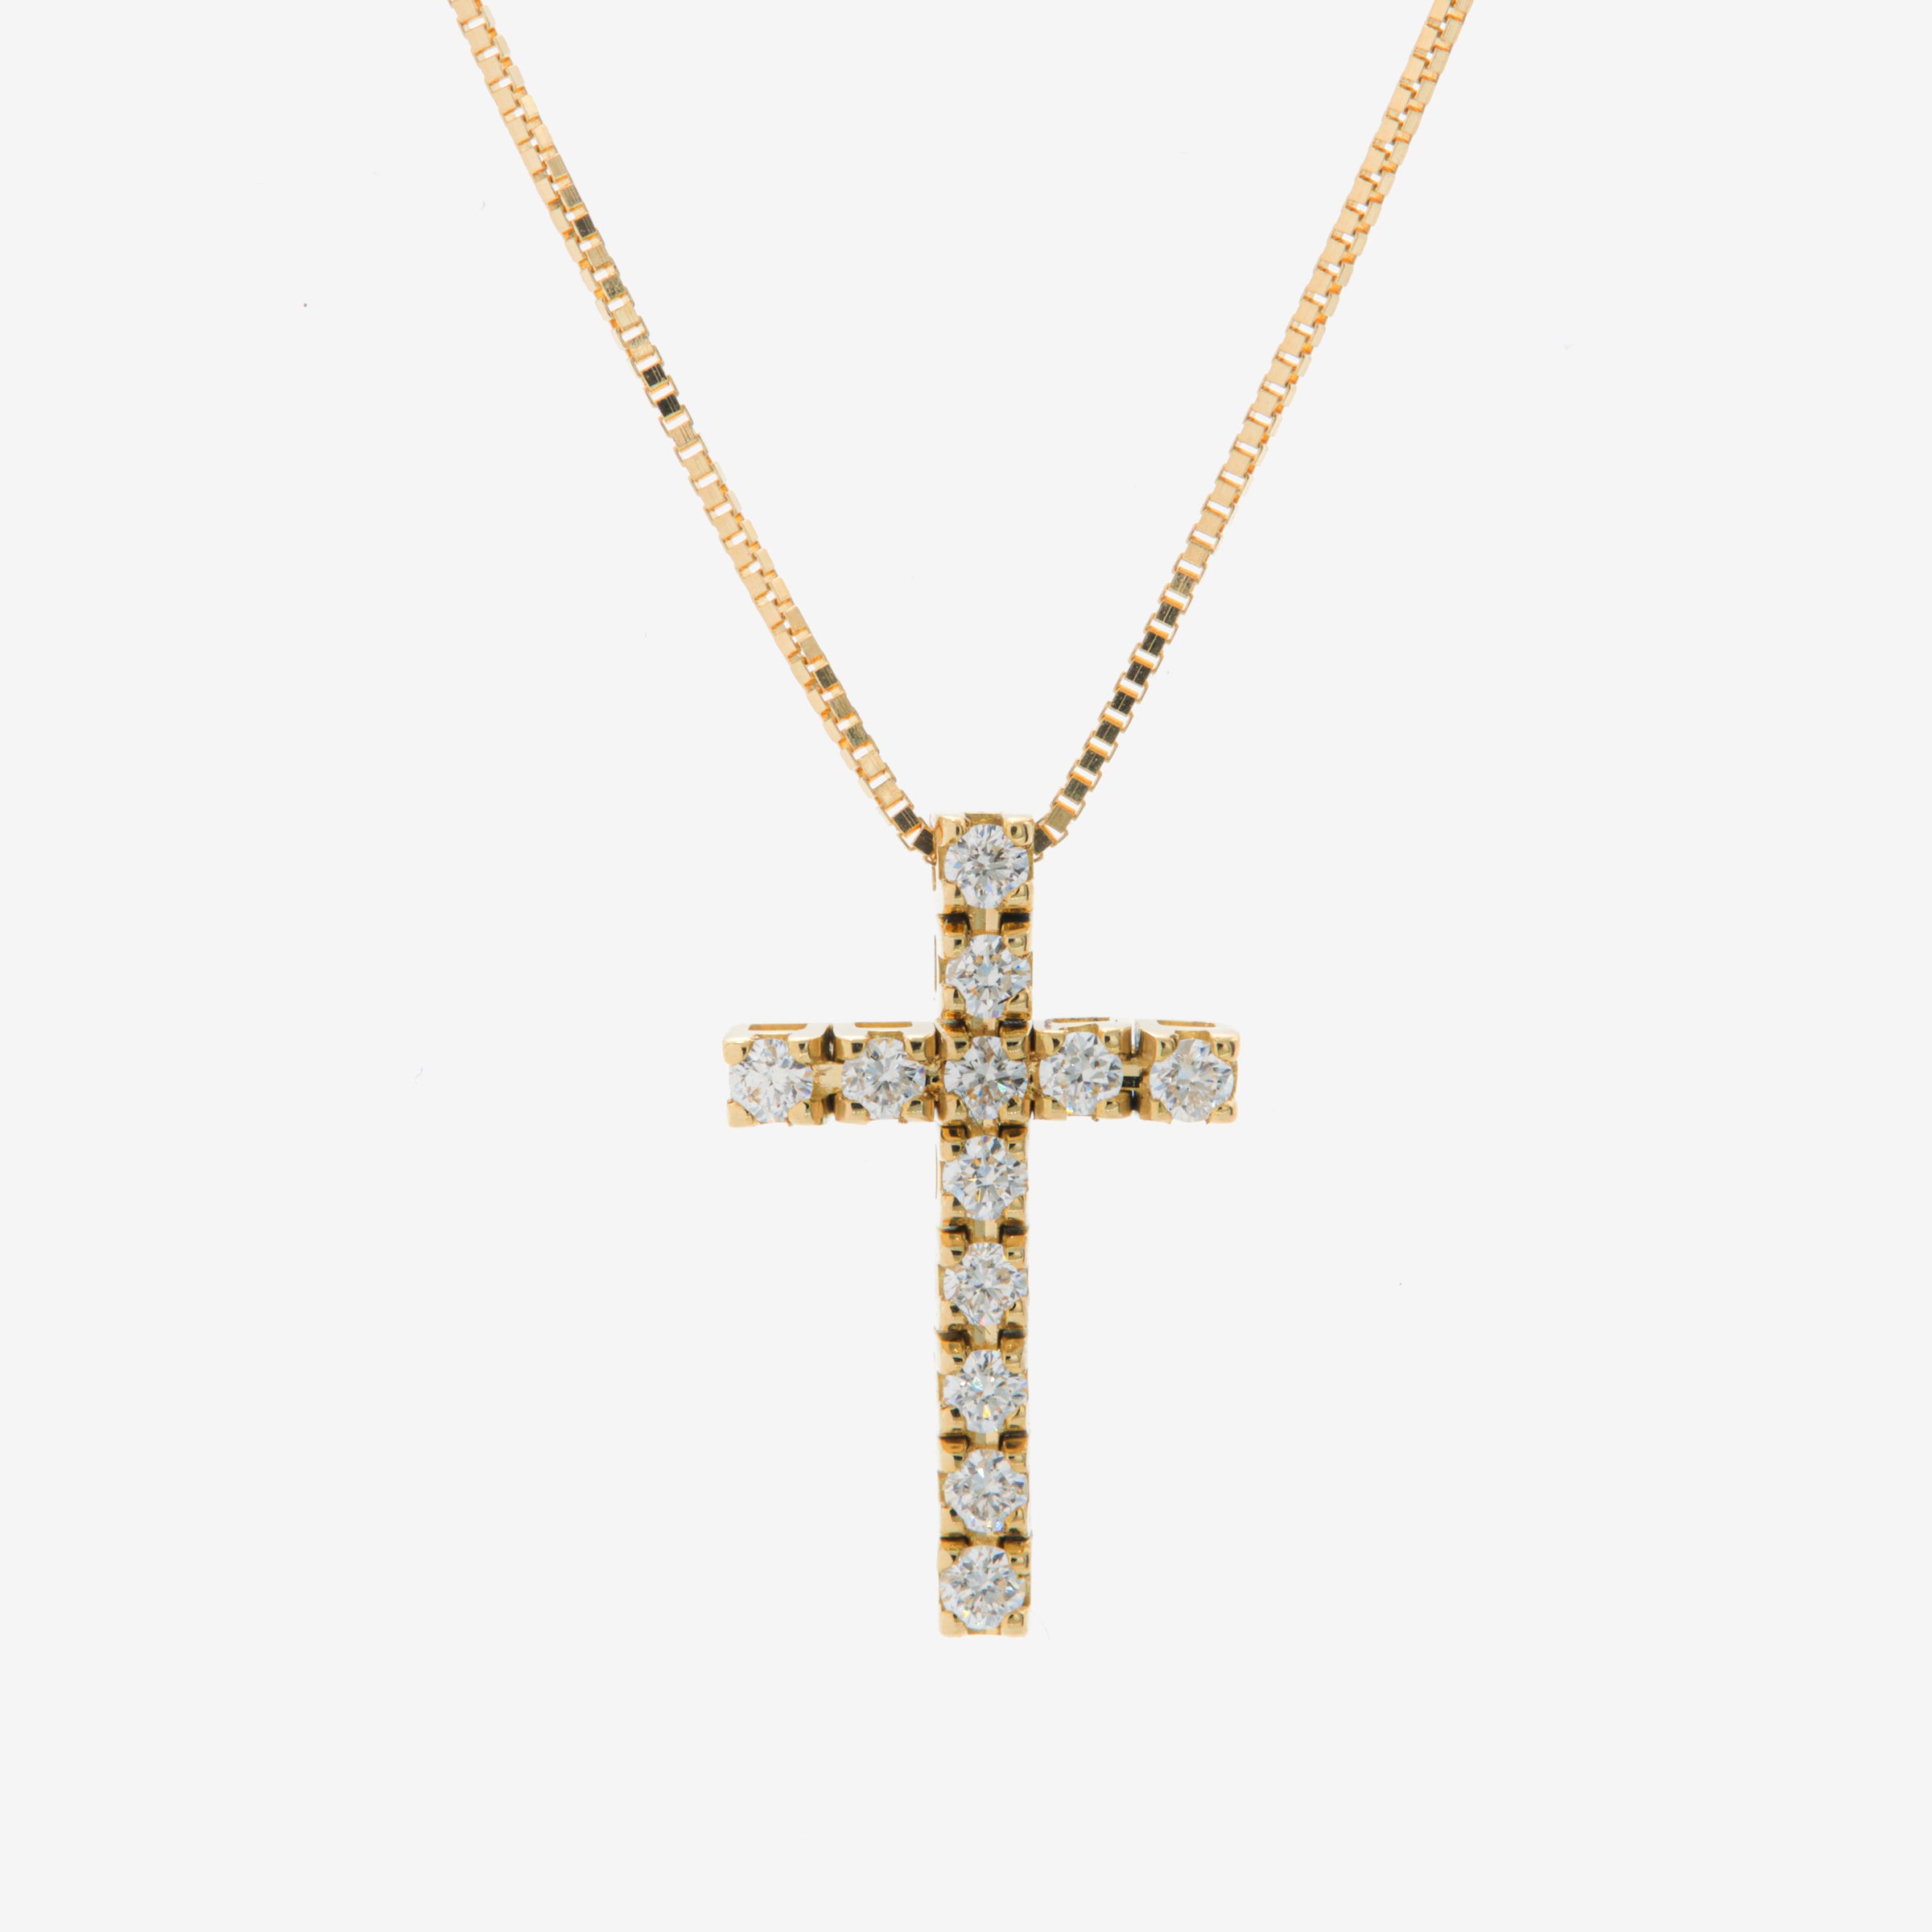 Cross necklace yellow gold and white diamonds 0.20 ct